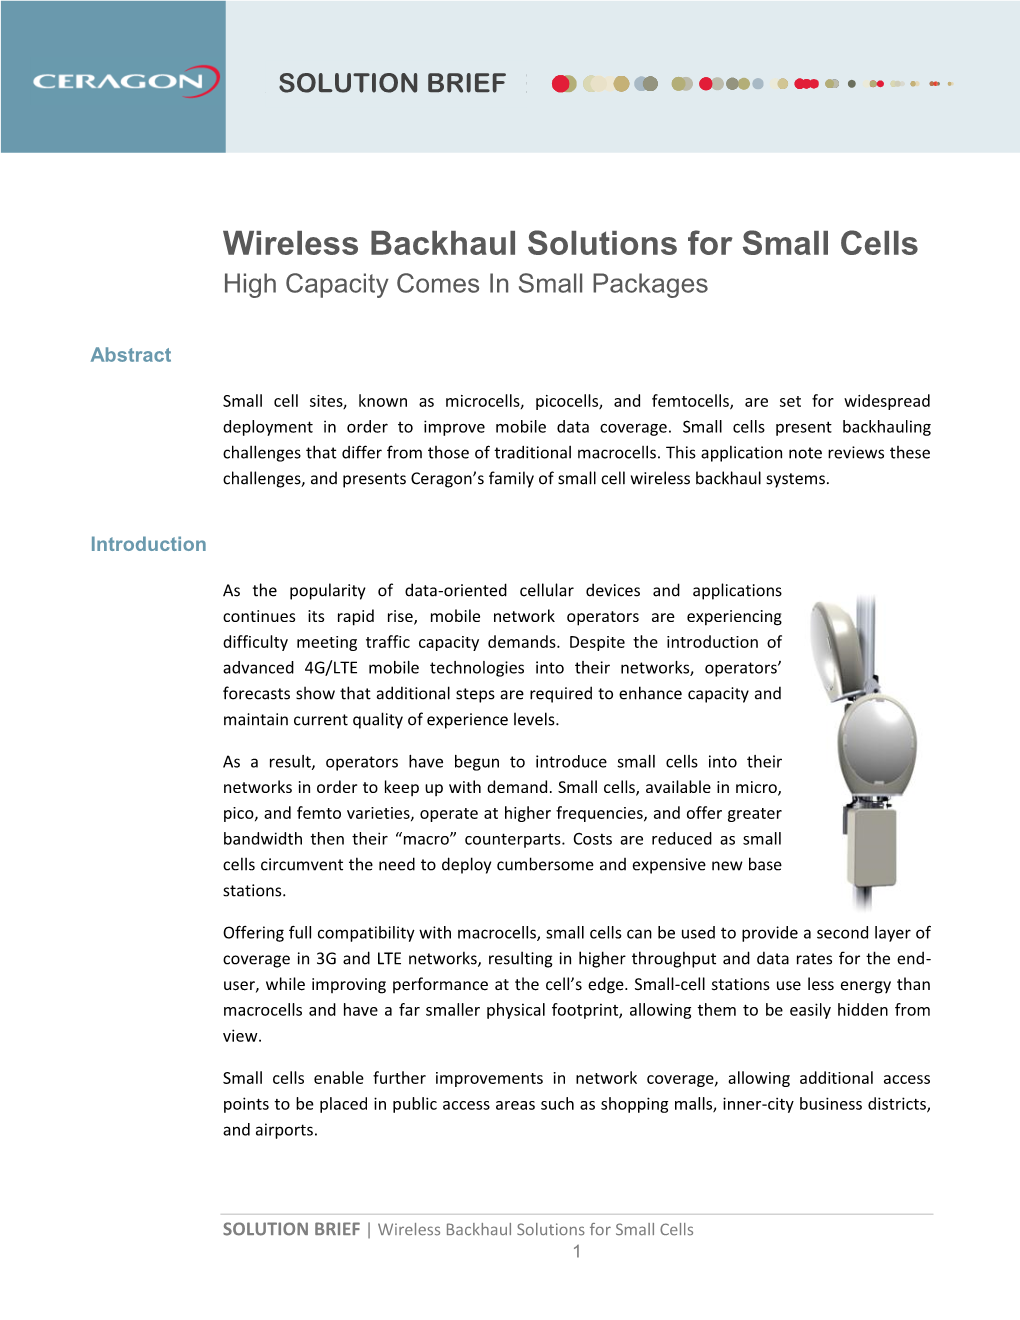 Wireless Backhaul Solutions for Small Cells High Capacity Comes in Small Packages